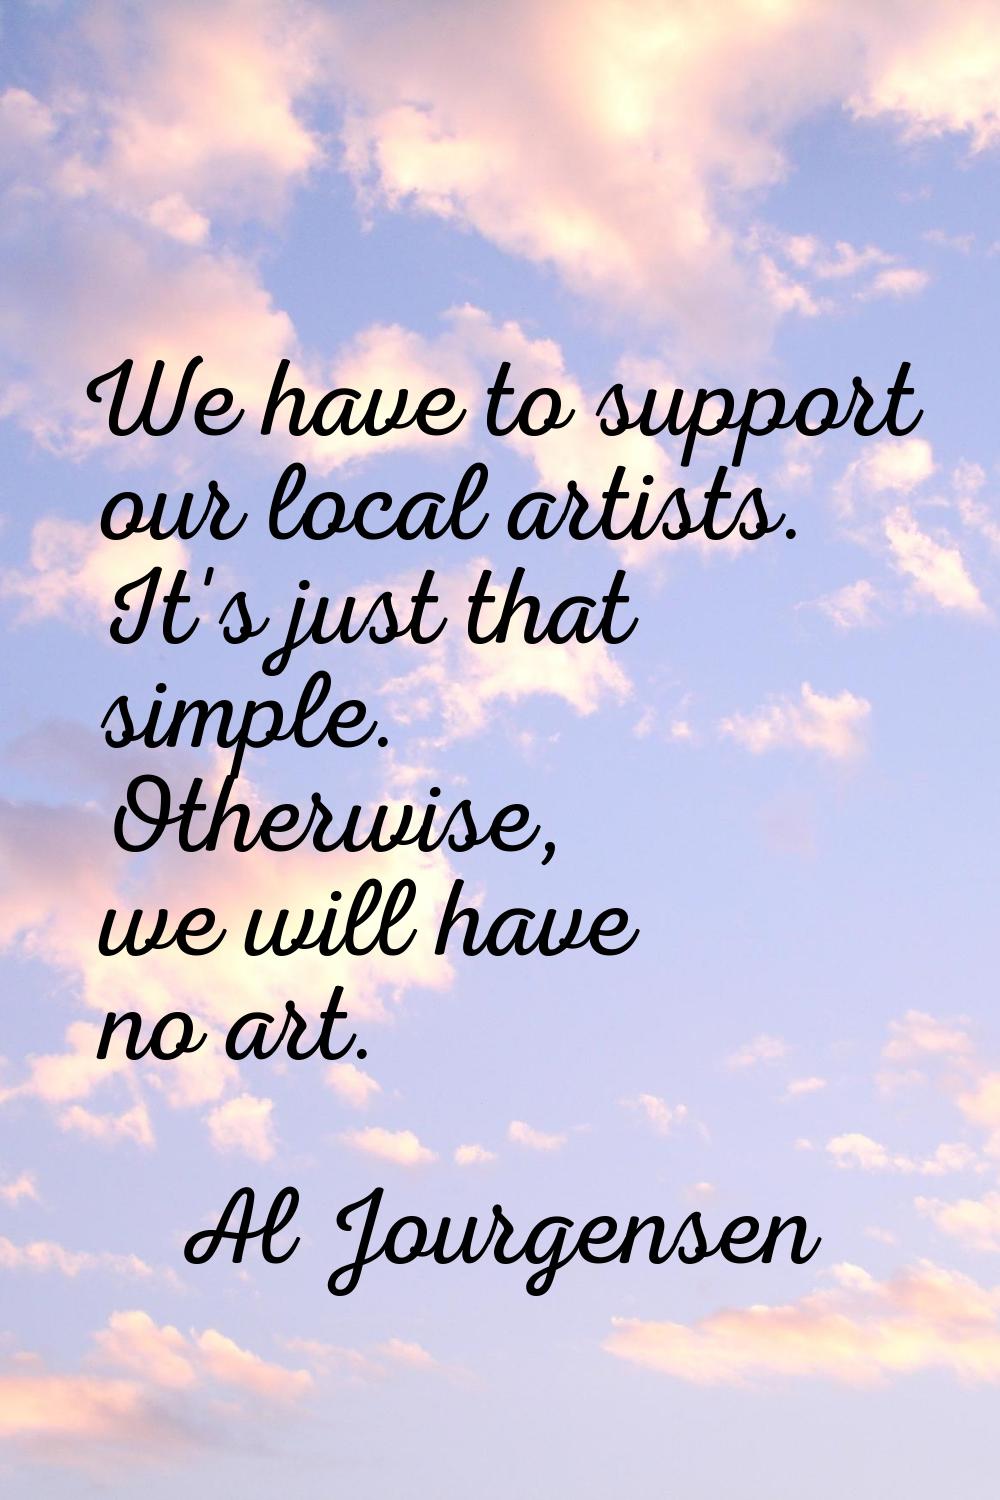 We have to support our local artists. It's just that simple. Otherwise, we will have no art.